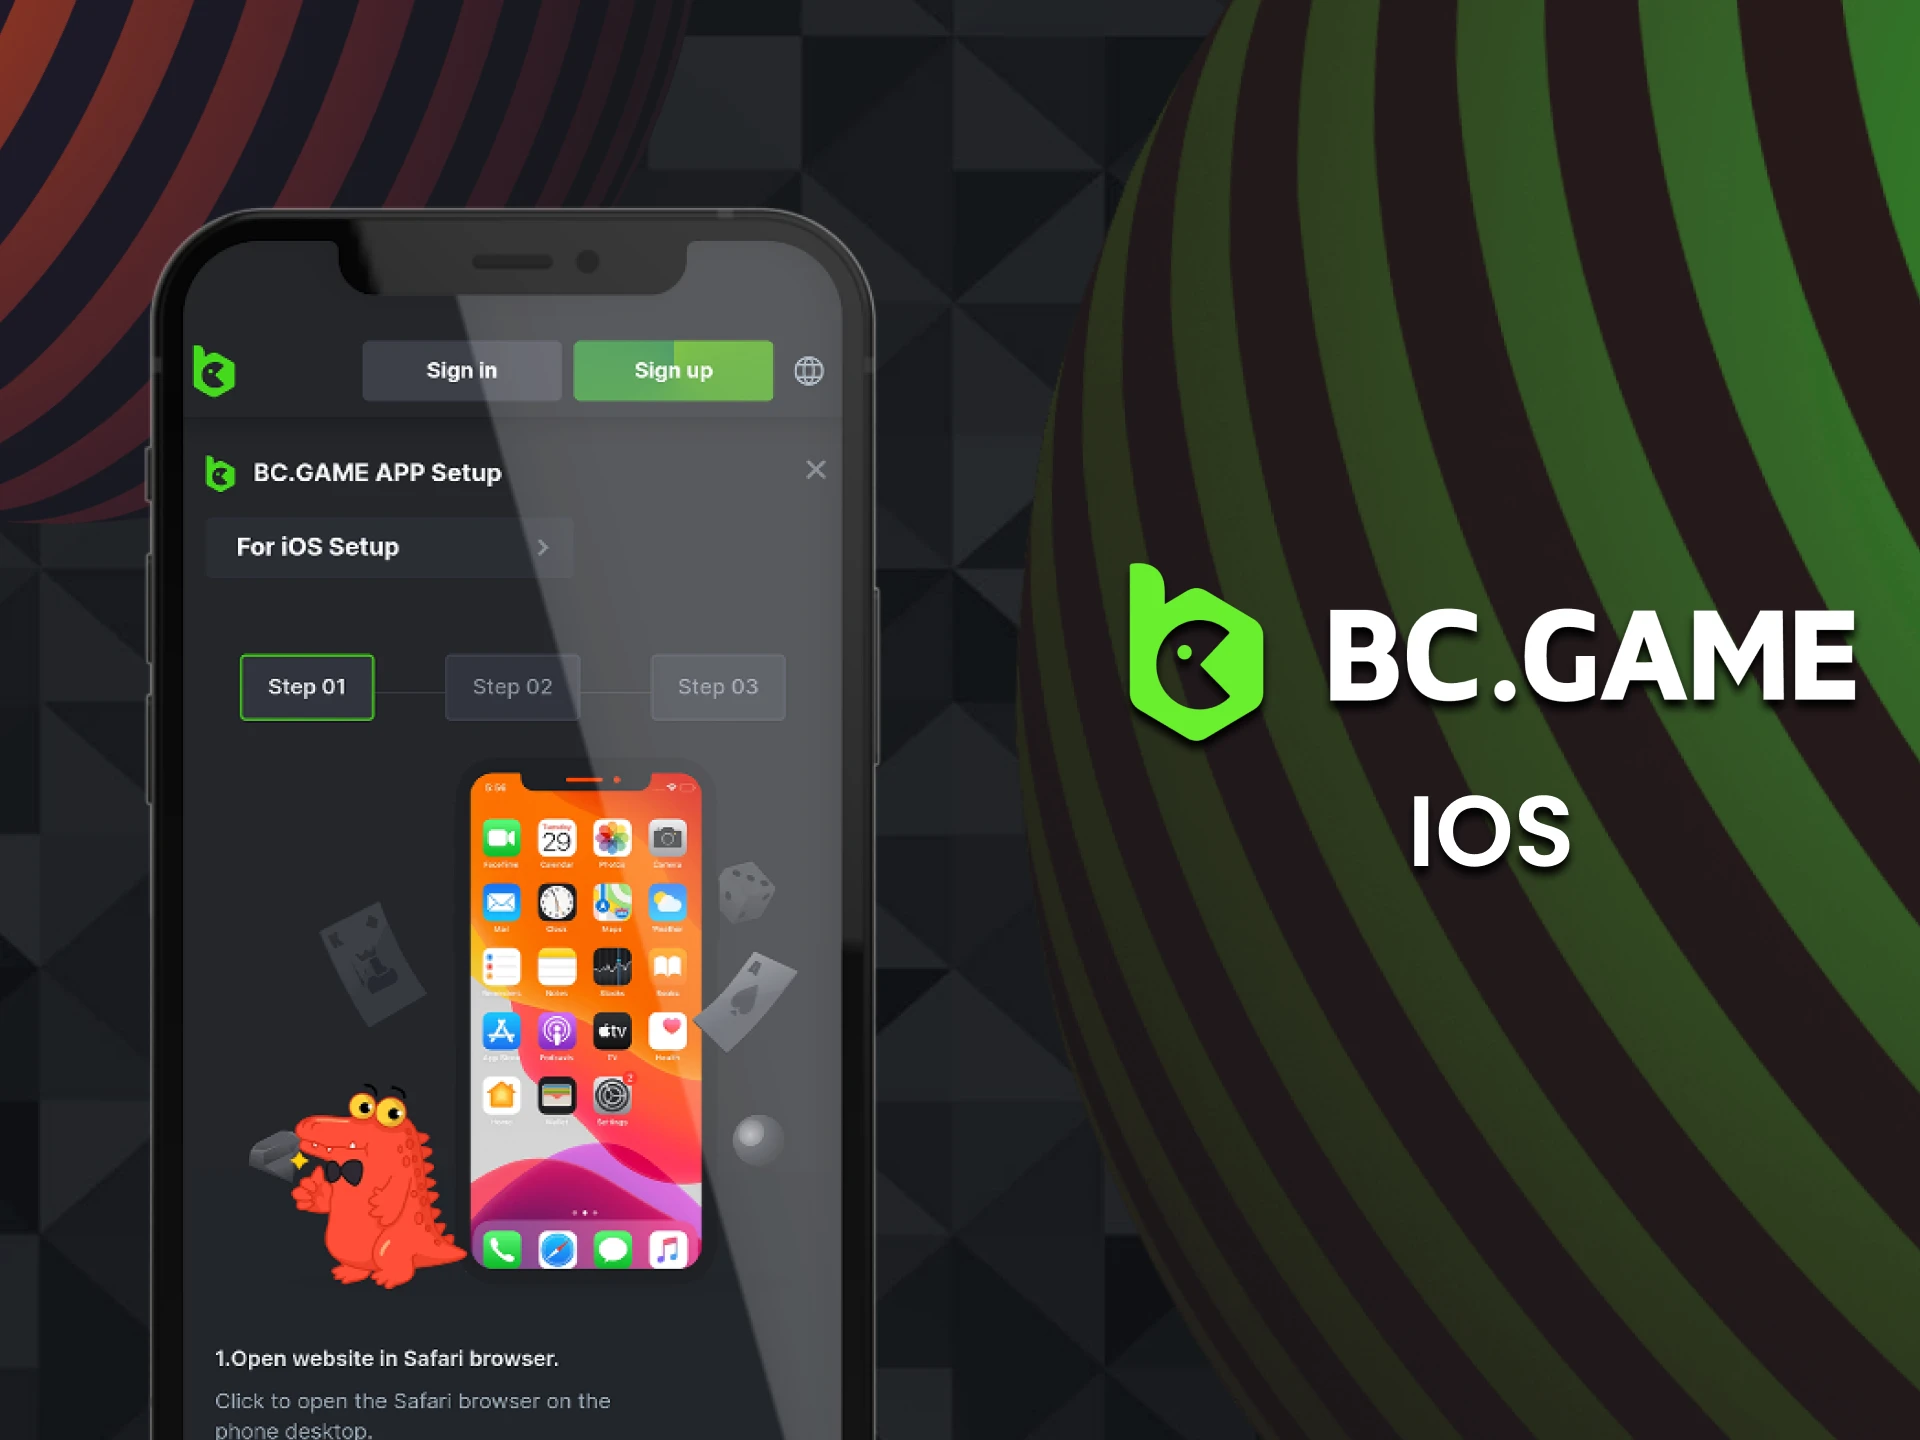 Download and install BC Game app on any iOS device.